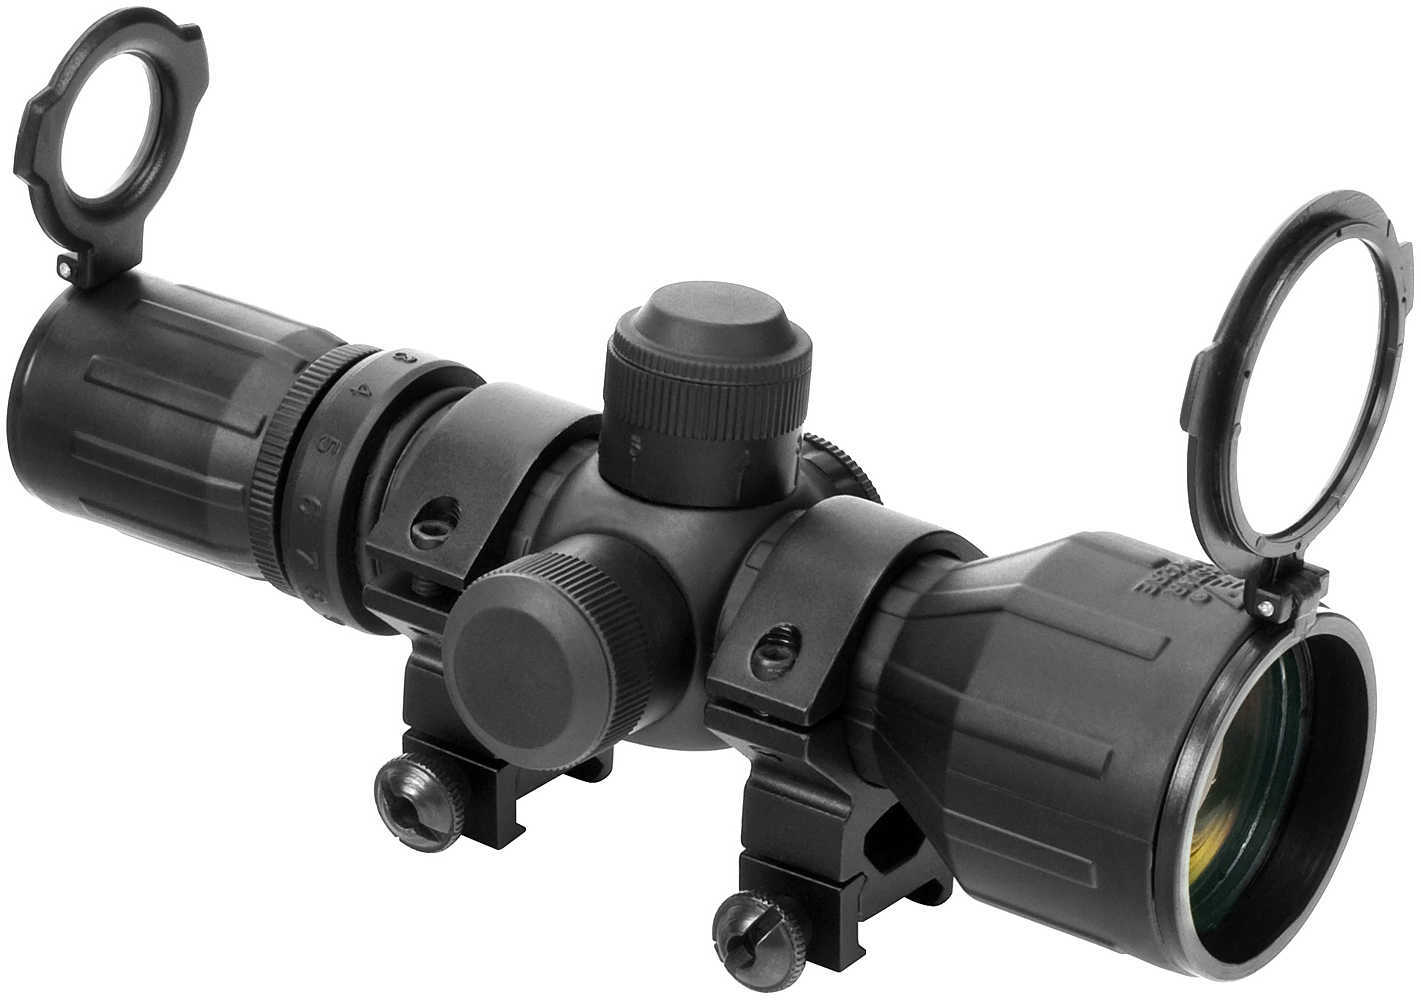 NcStar Rubber Armored Compact 3-9X42 Scope